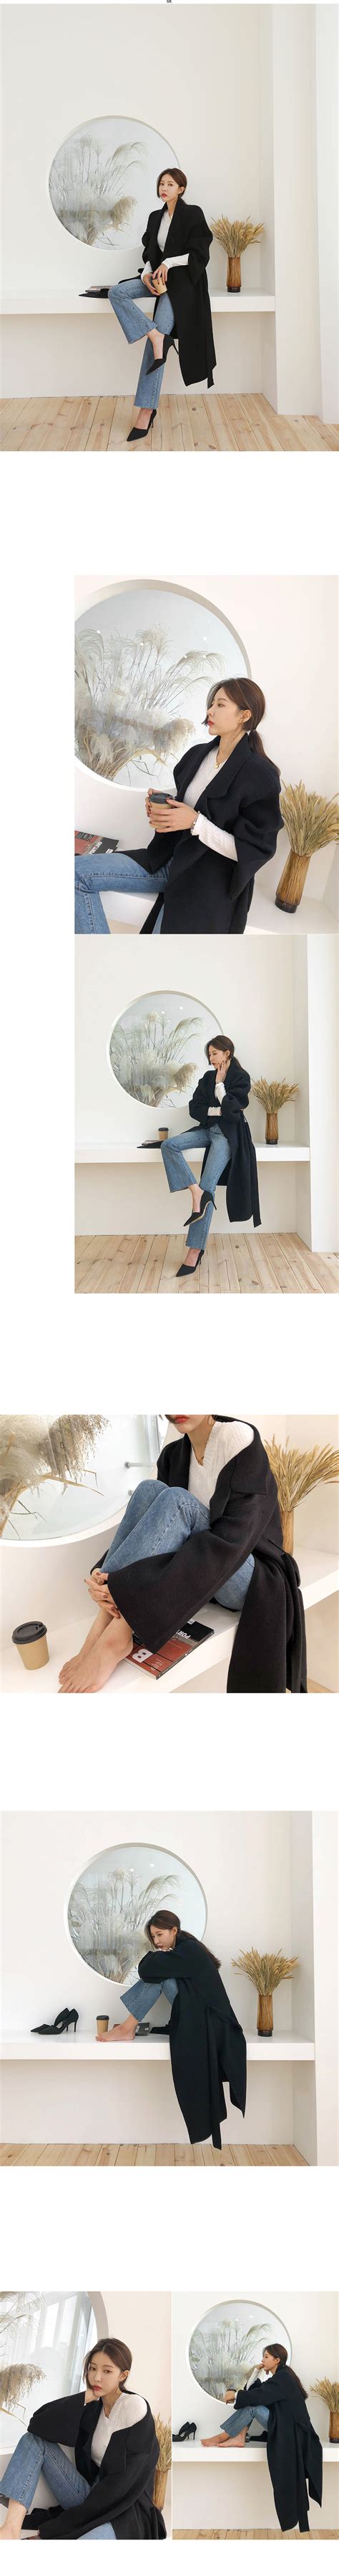 Notch Collar Self Tie Long Cardigan DABAGIRL Your Style Maker Korean Fashions Clothes